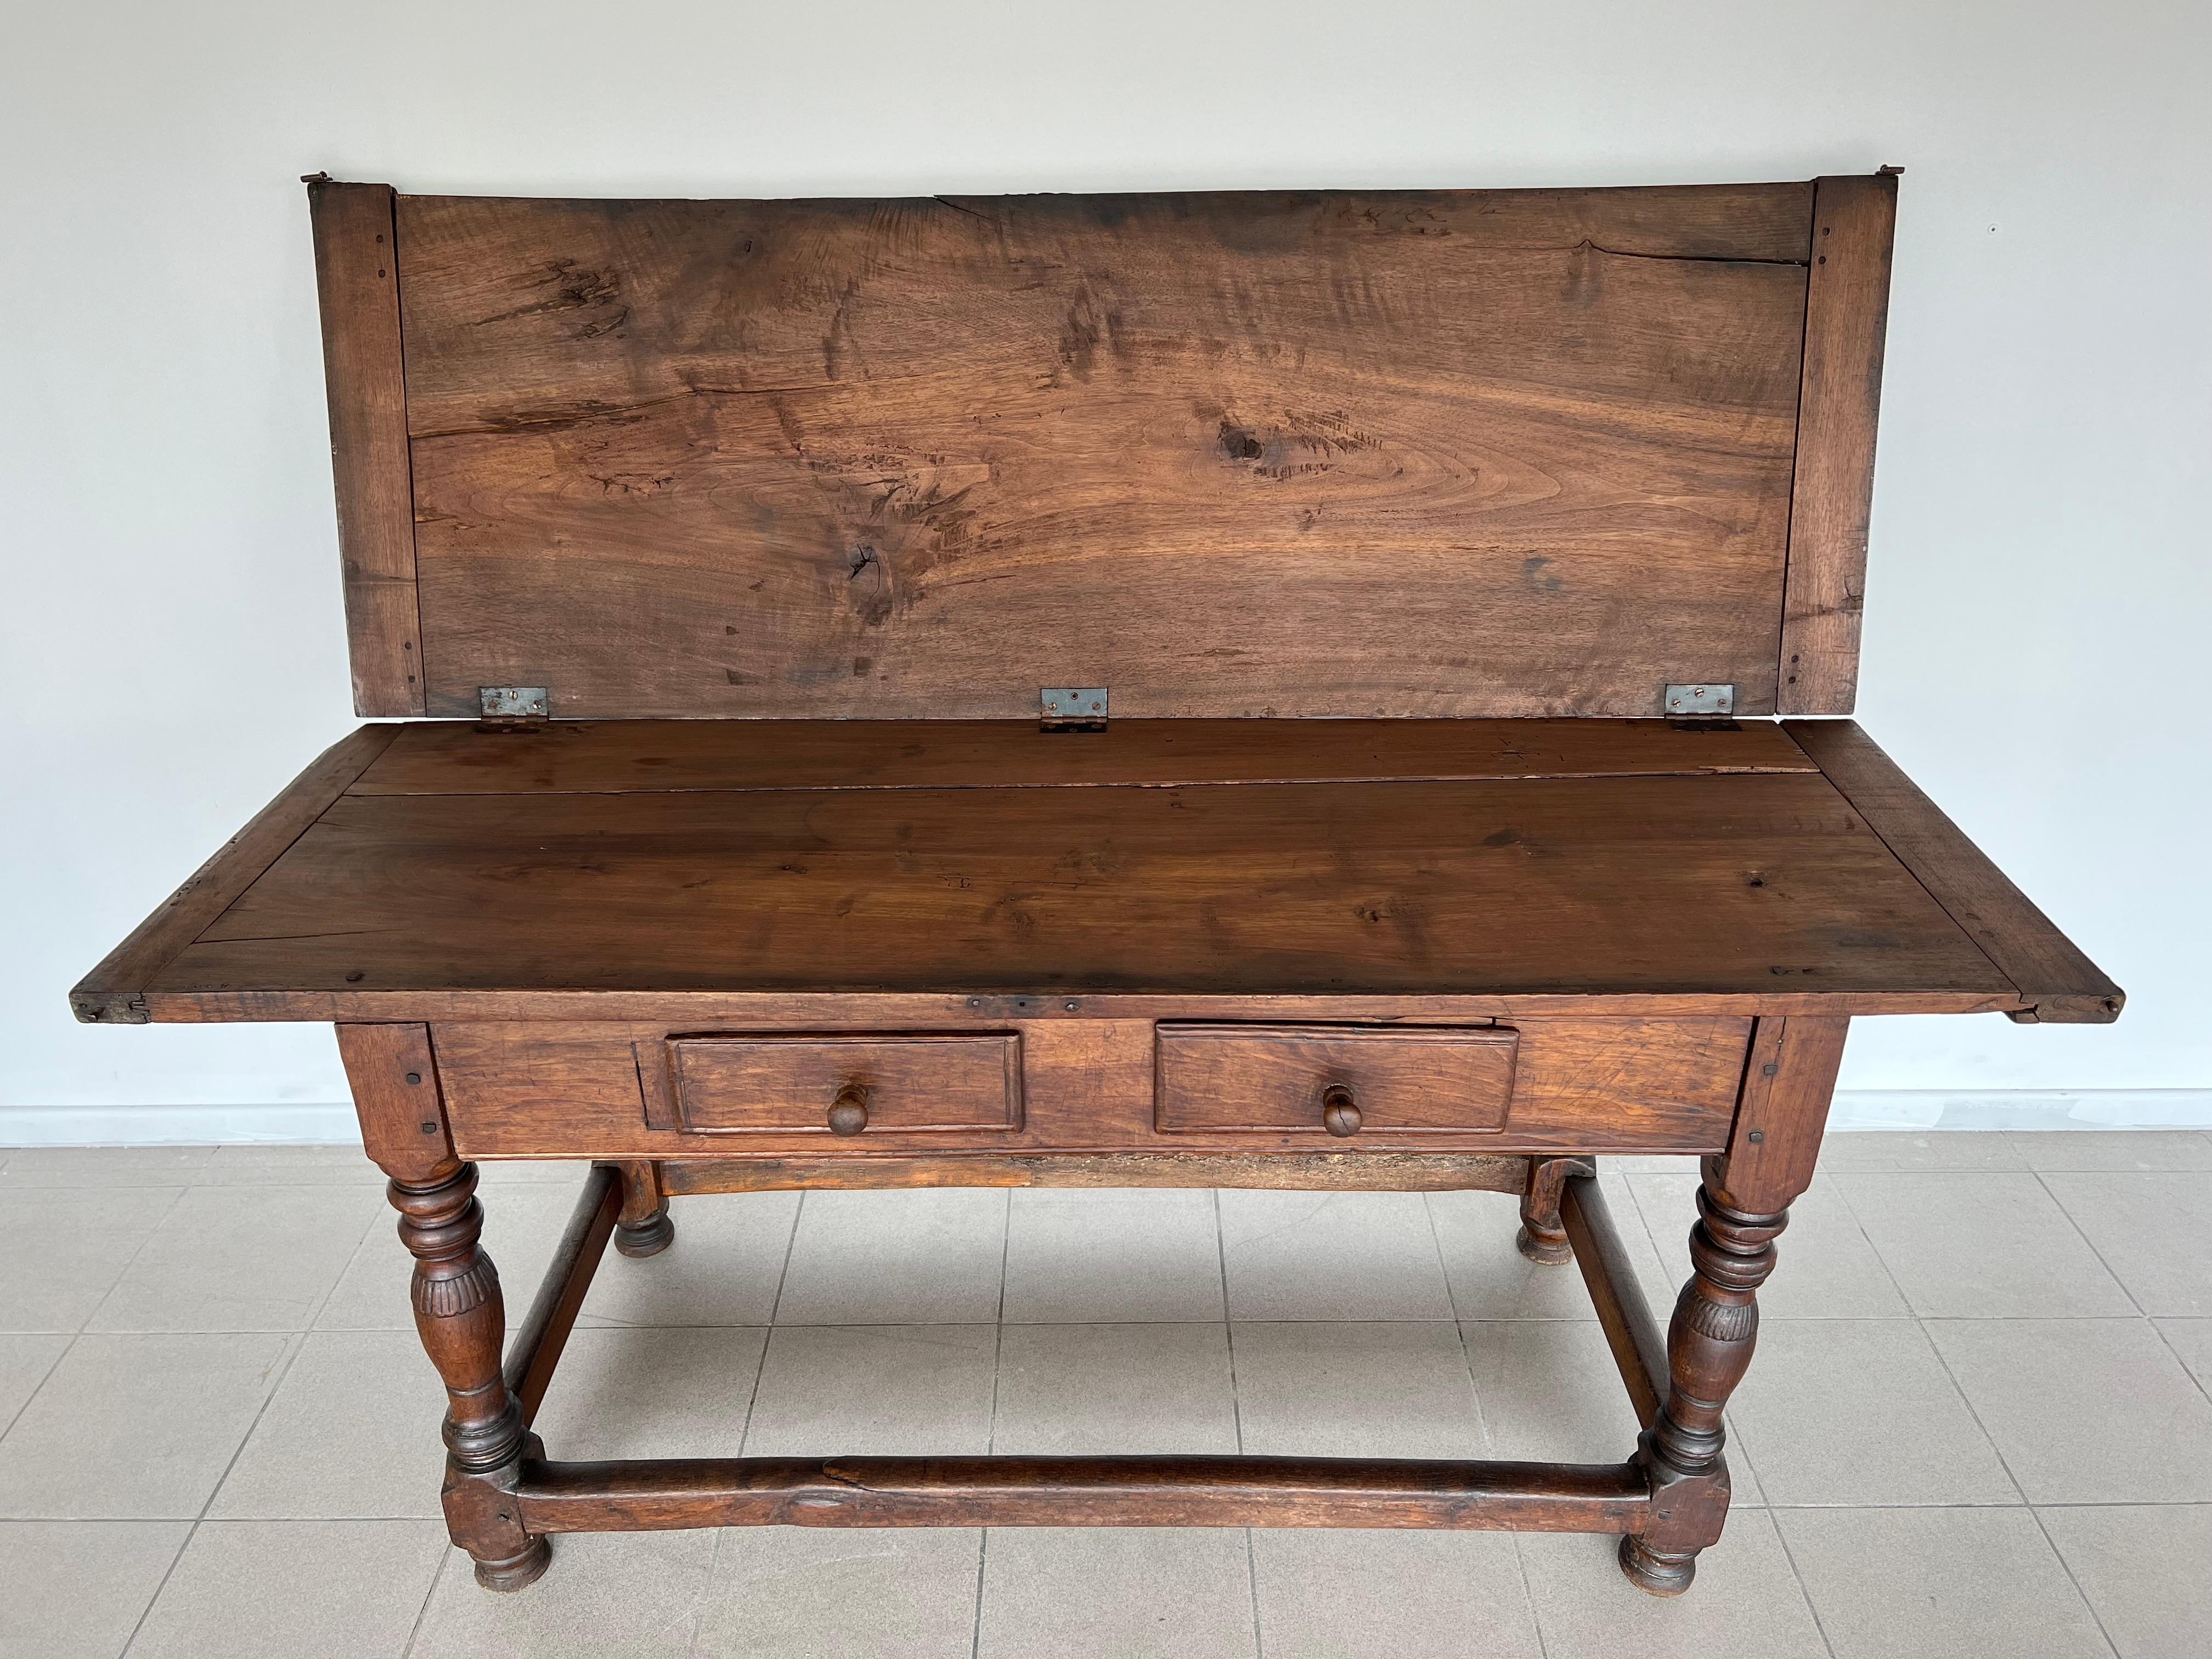 Rare 18c Swiss French Alp Rustic Flip Top Dining Table or Desk With Two Drawers In Fair Condition For Sale In Bridgeport, CT